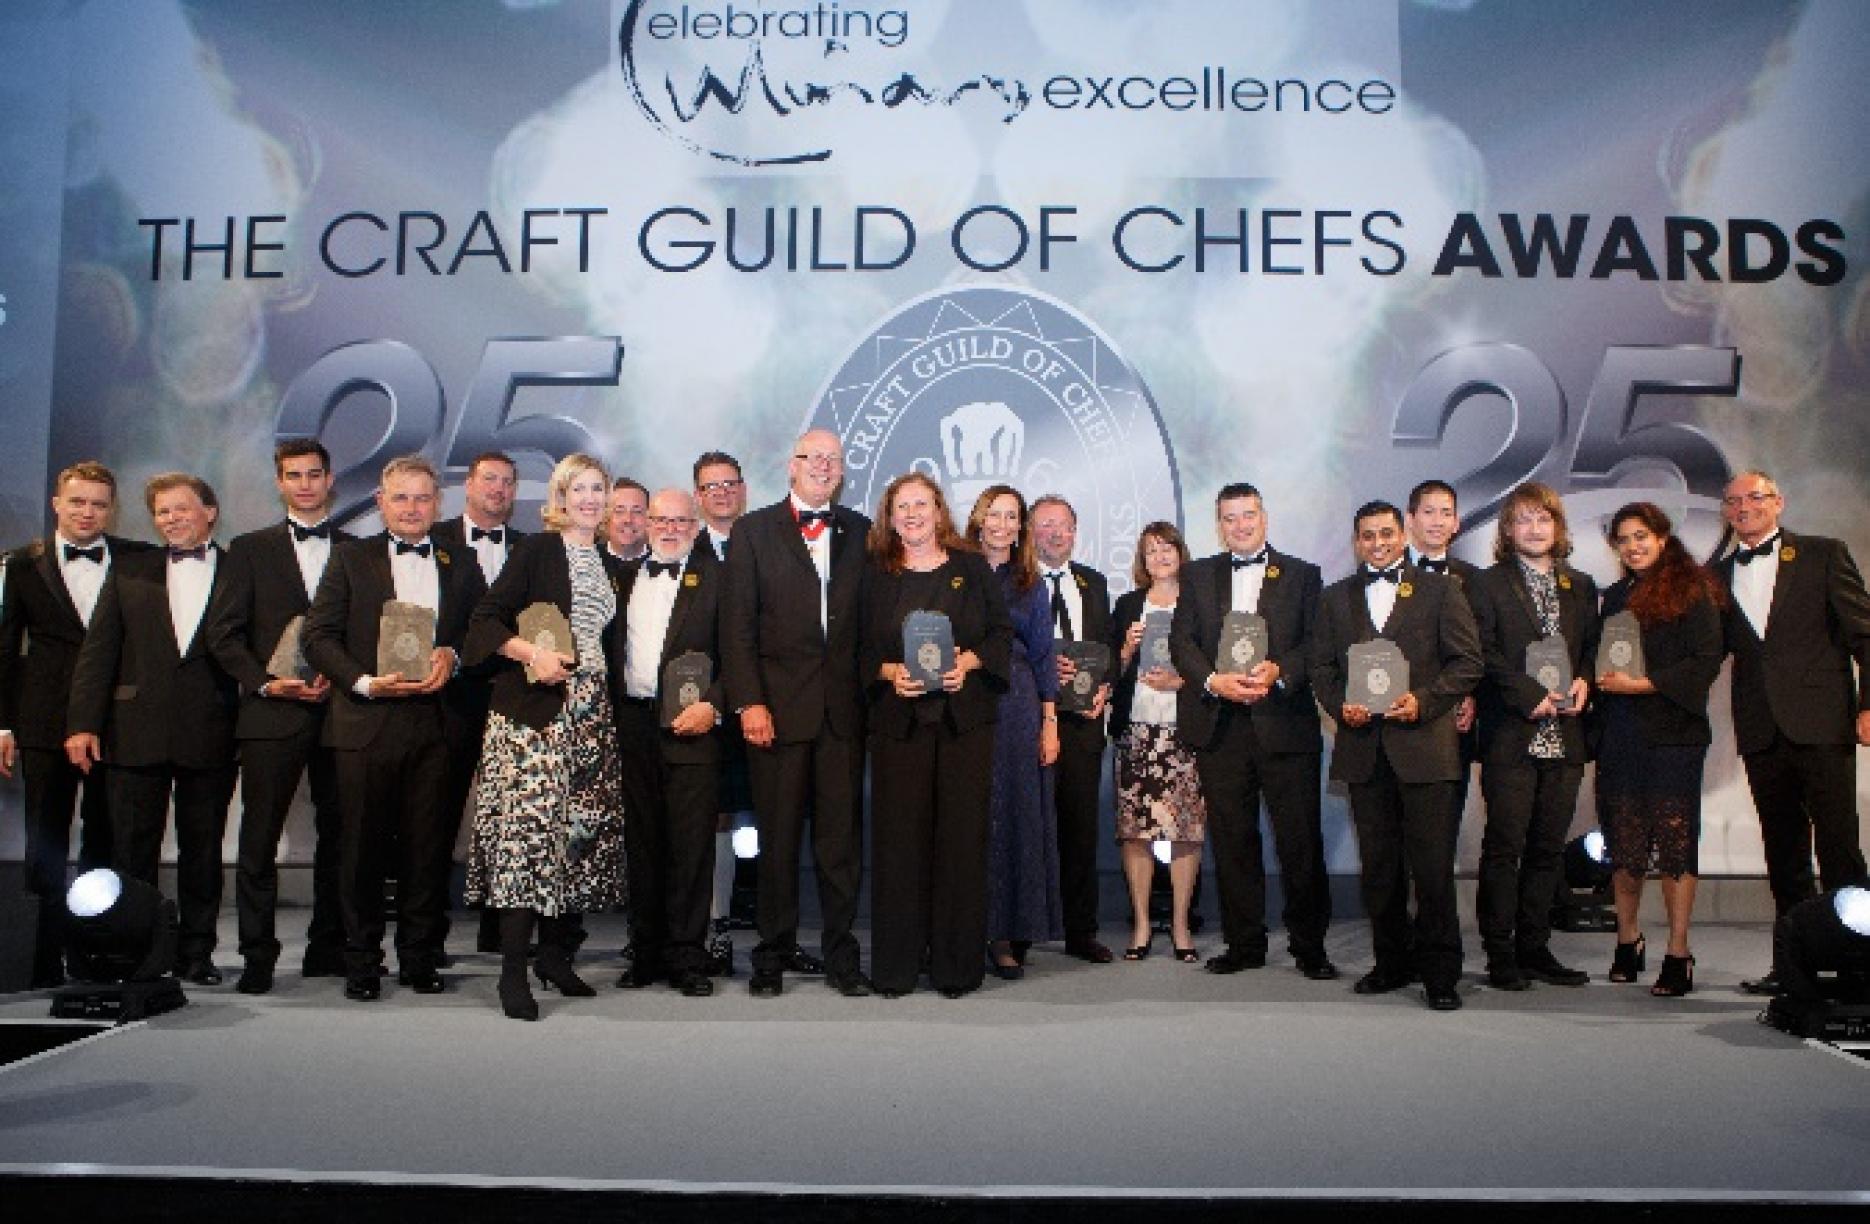 Craft Guild of Chefs Awards 2019 Park Lane Hilton London event Marco Pierre White winners 